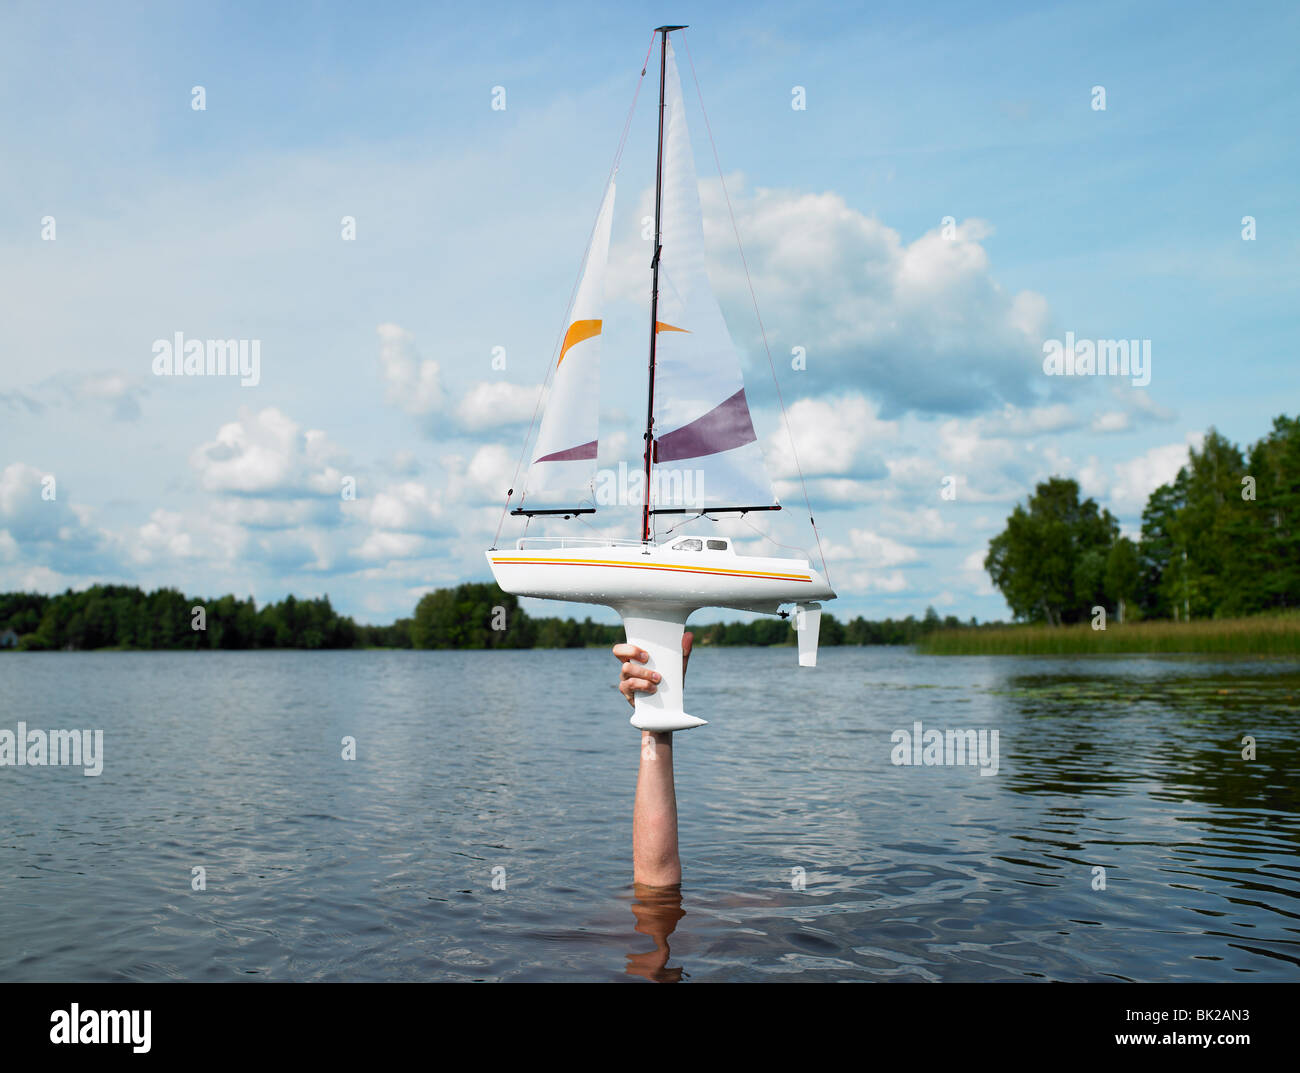 Remote-controlled boat above the water Stock Photo